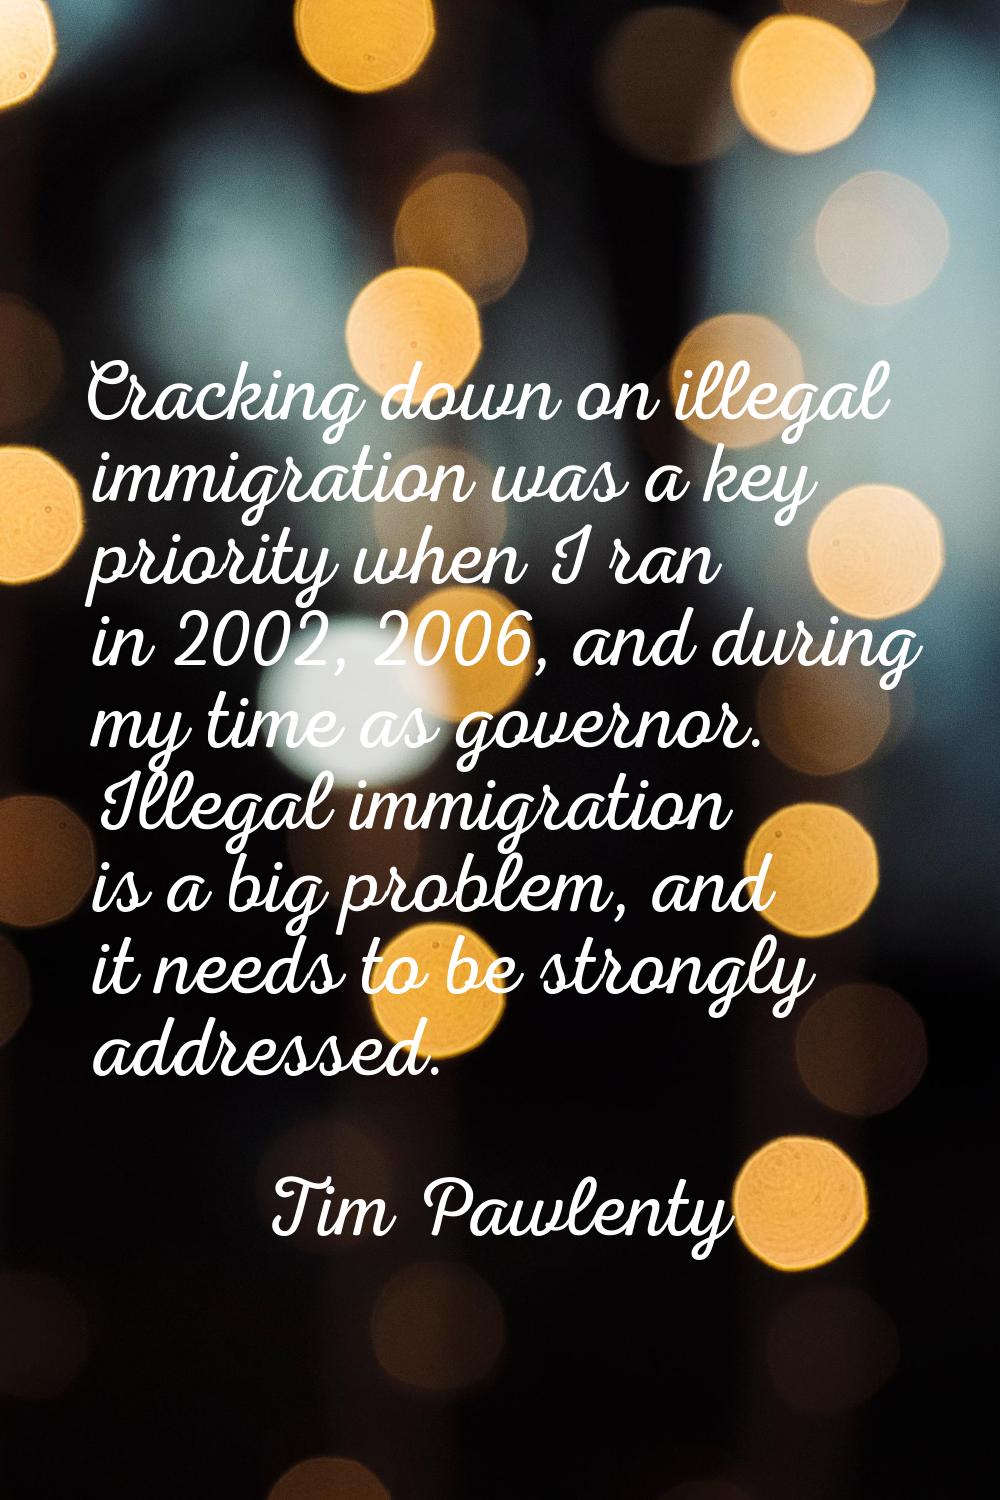 Cracking down on illegal immigration was a key priority when I ran in 2002, 2006, and during my tim